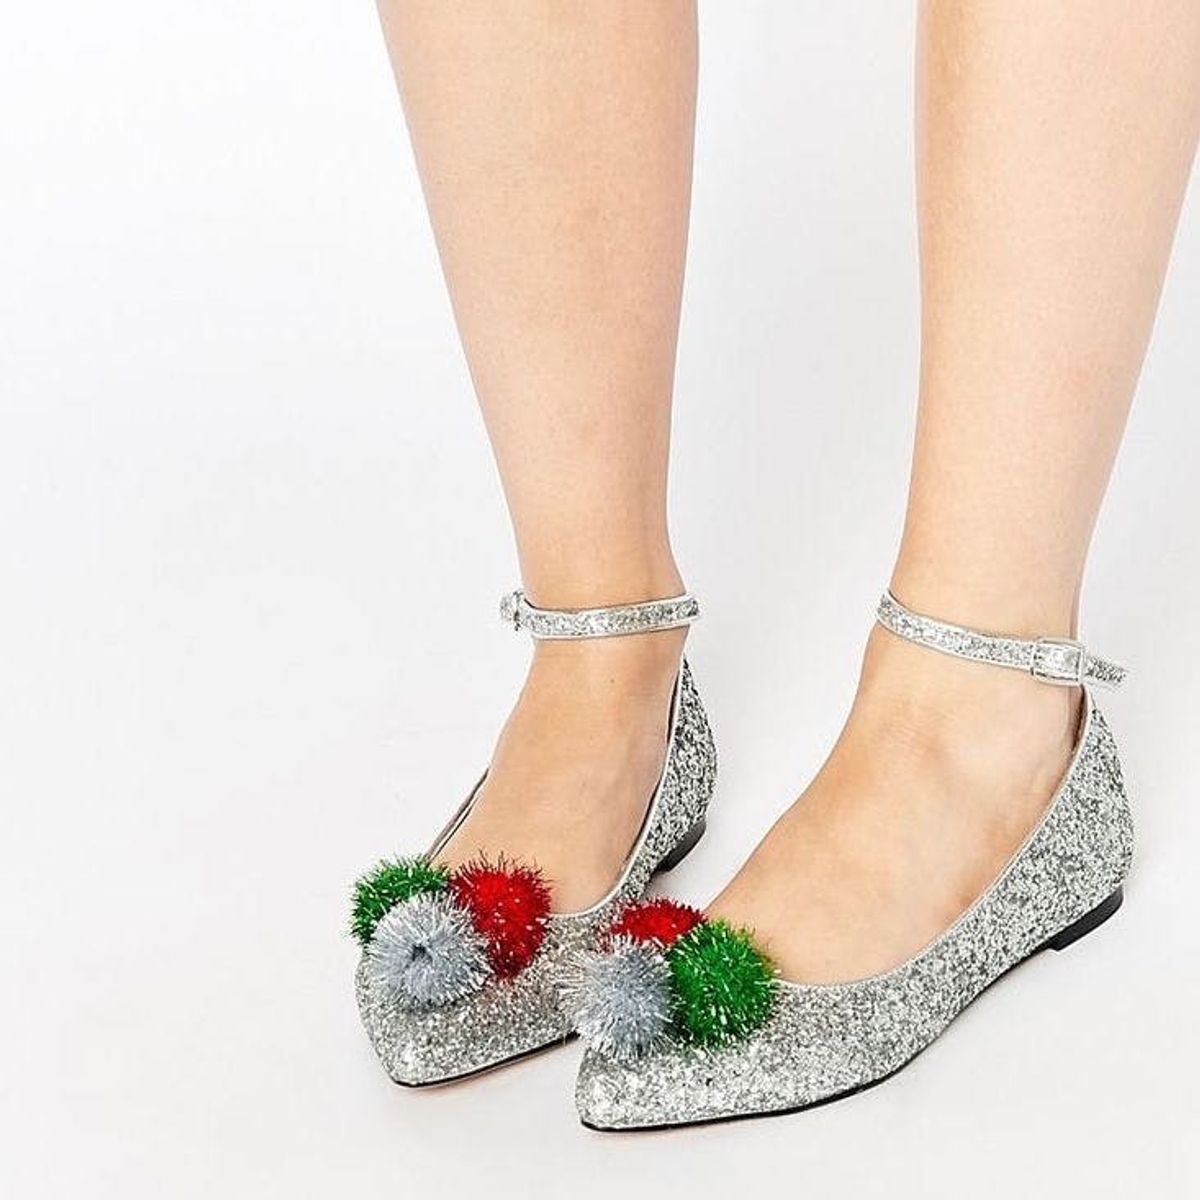 22 Party-Approved Flats Just in Time for the Holidays